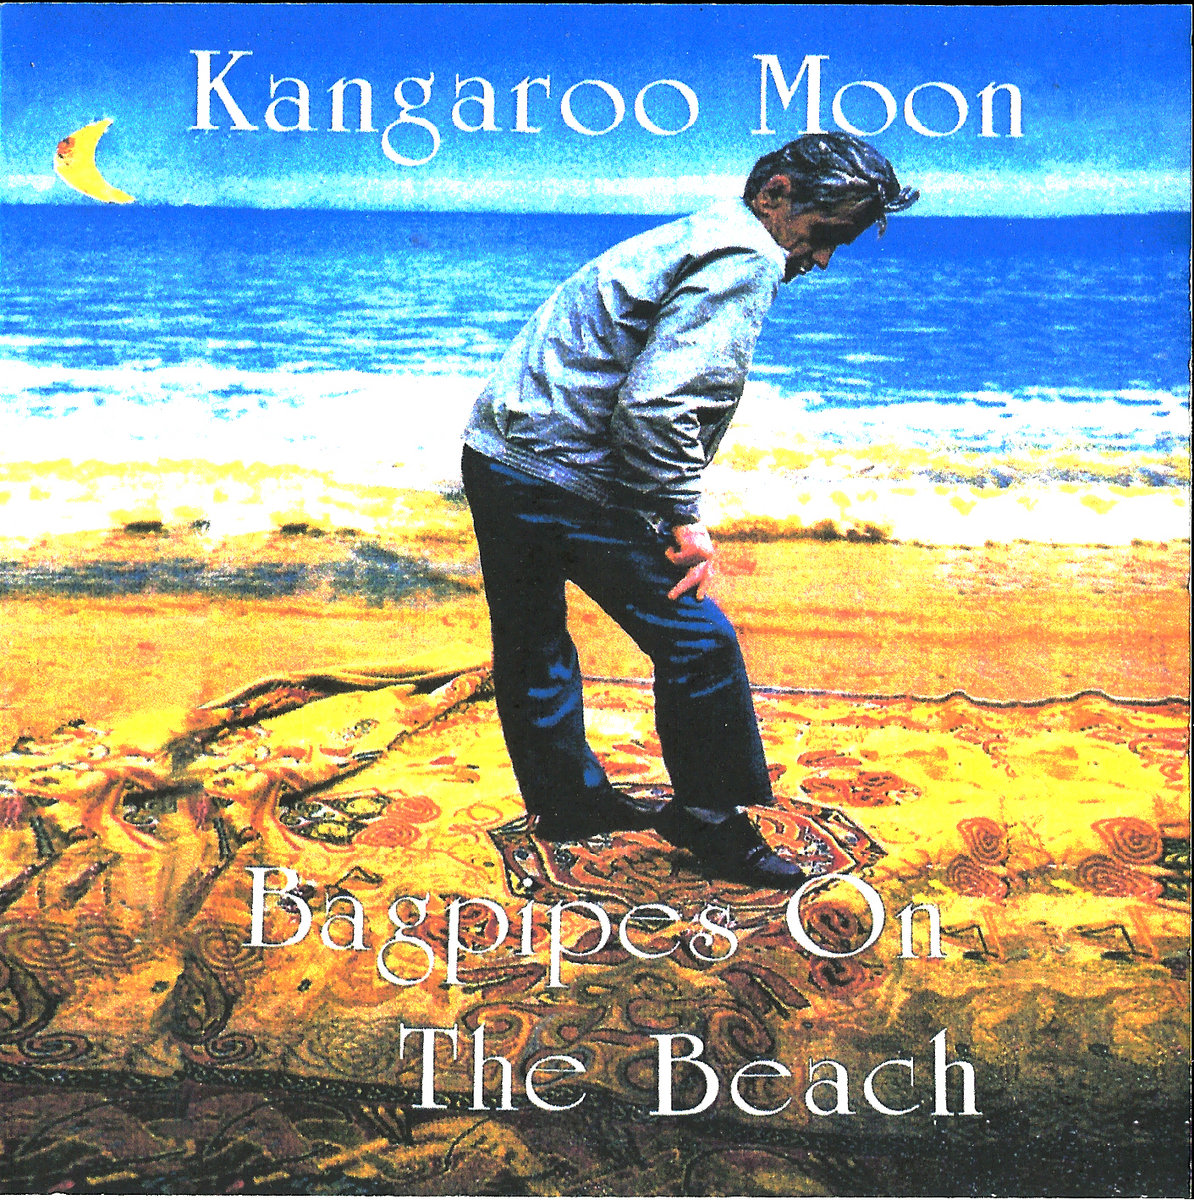 Kangaroo Moon – Bagpipes on the Beach. Re-Mastered. (1992/2021) [Official Digital Download 24bit/44,1kHz]